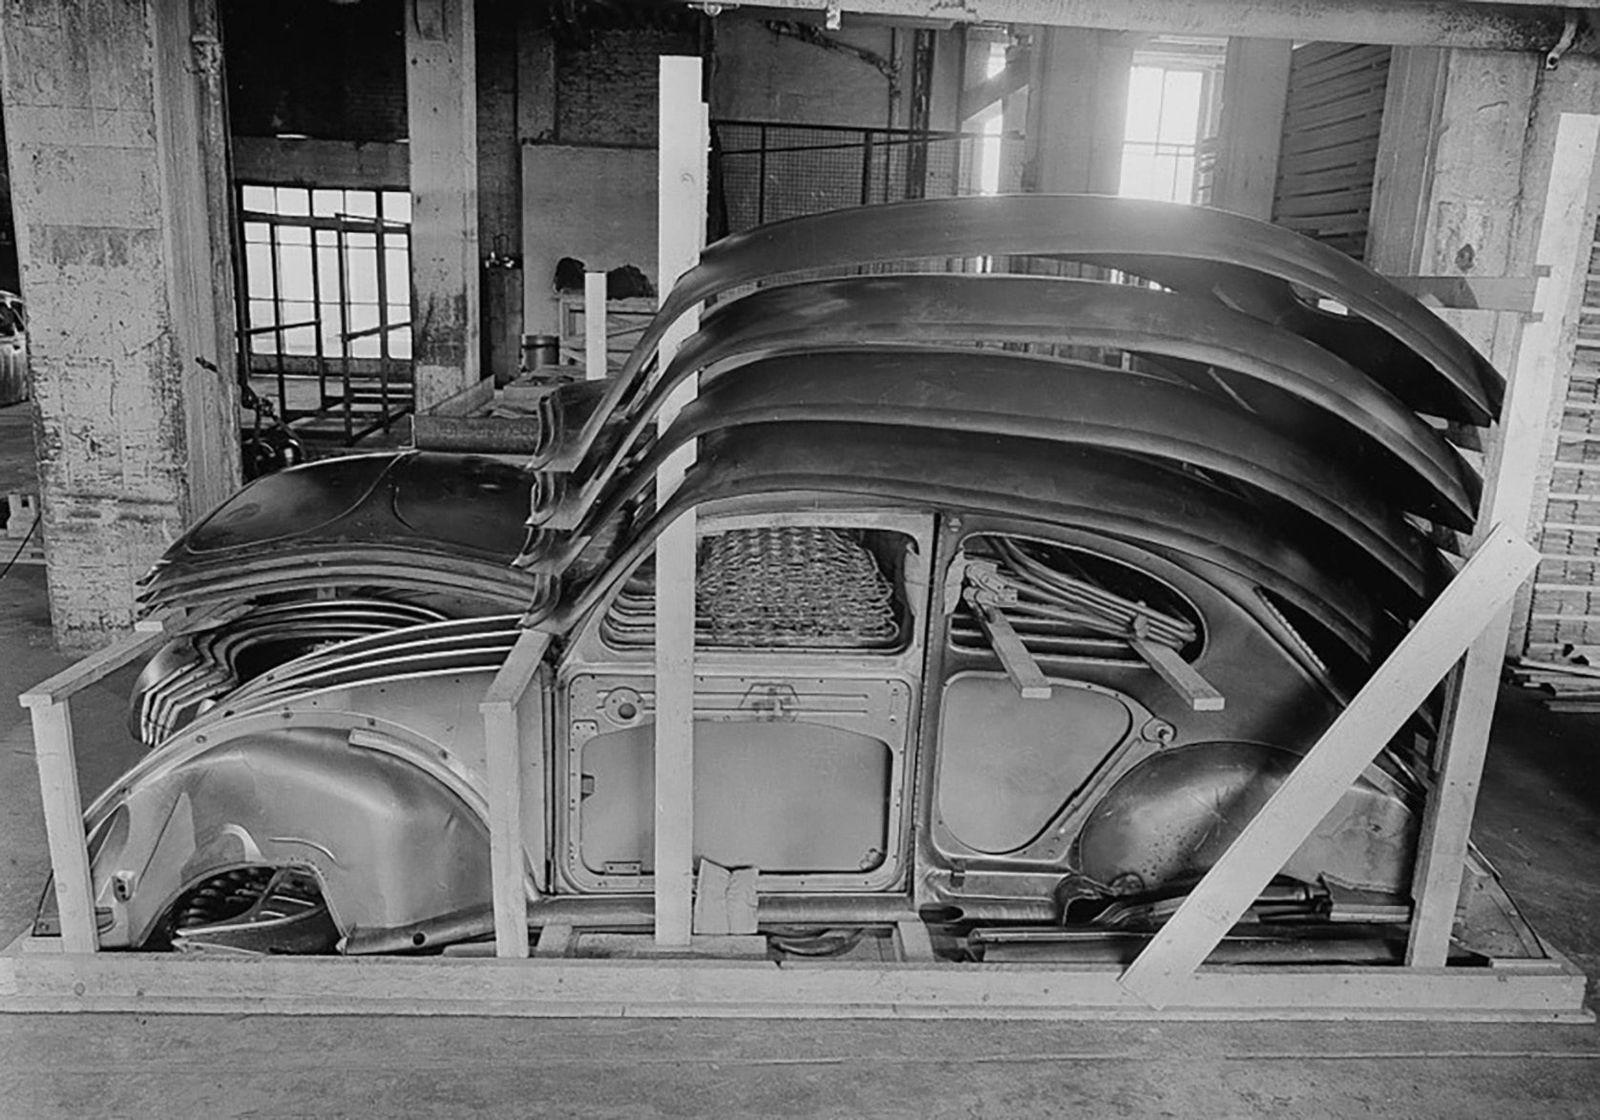 Beetles in boxes: 70 years of CKD car exports by Volkswagen